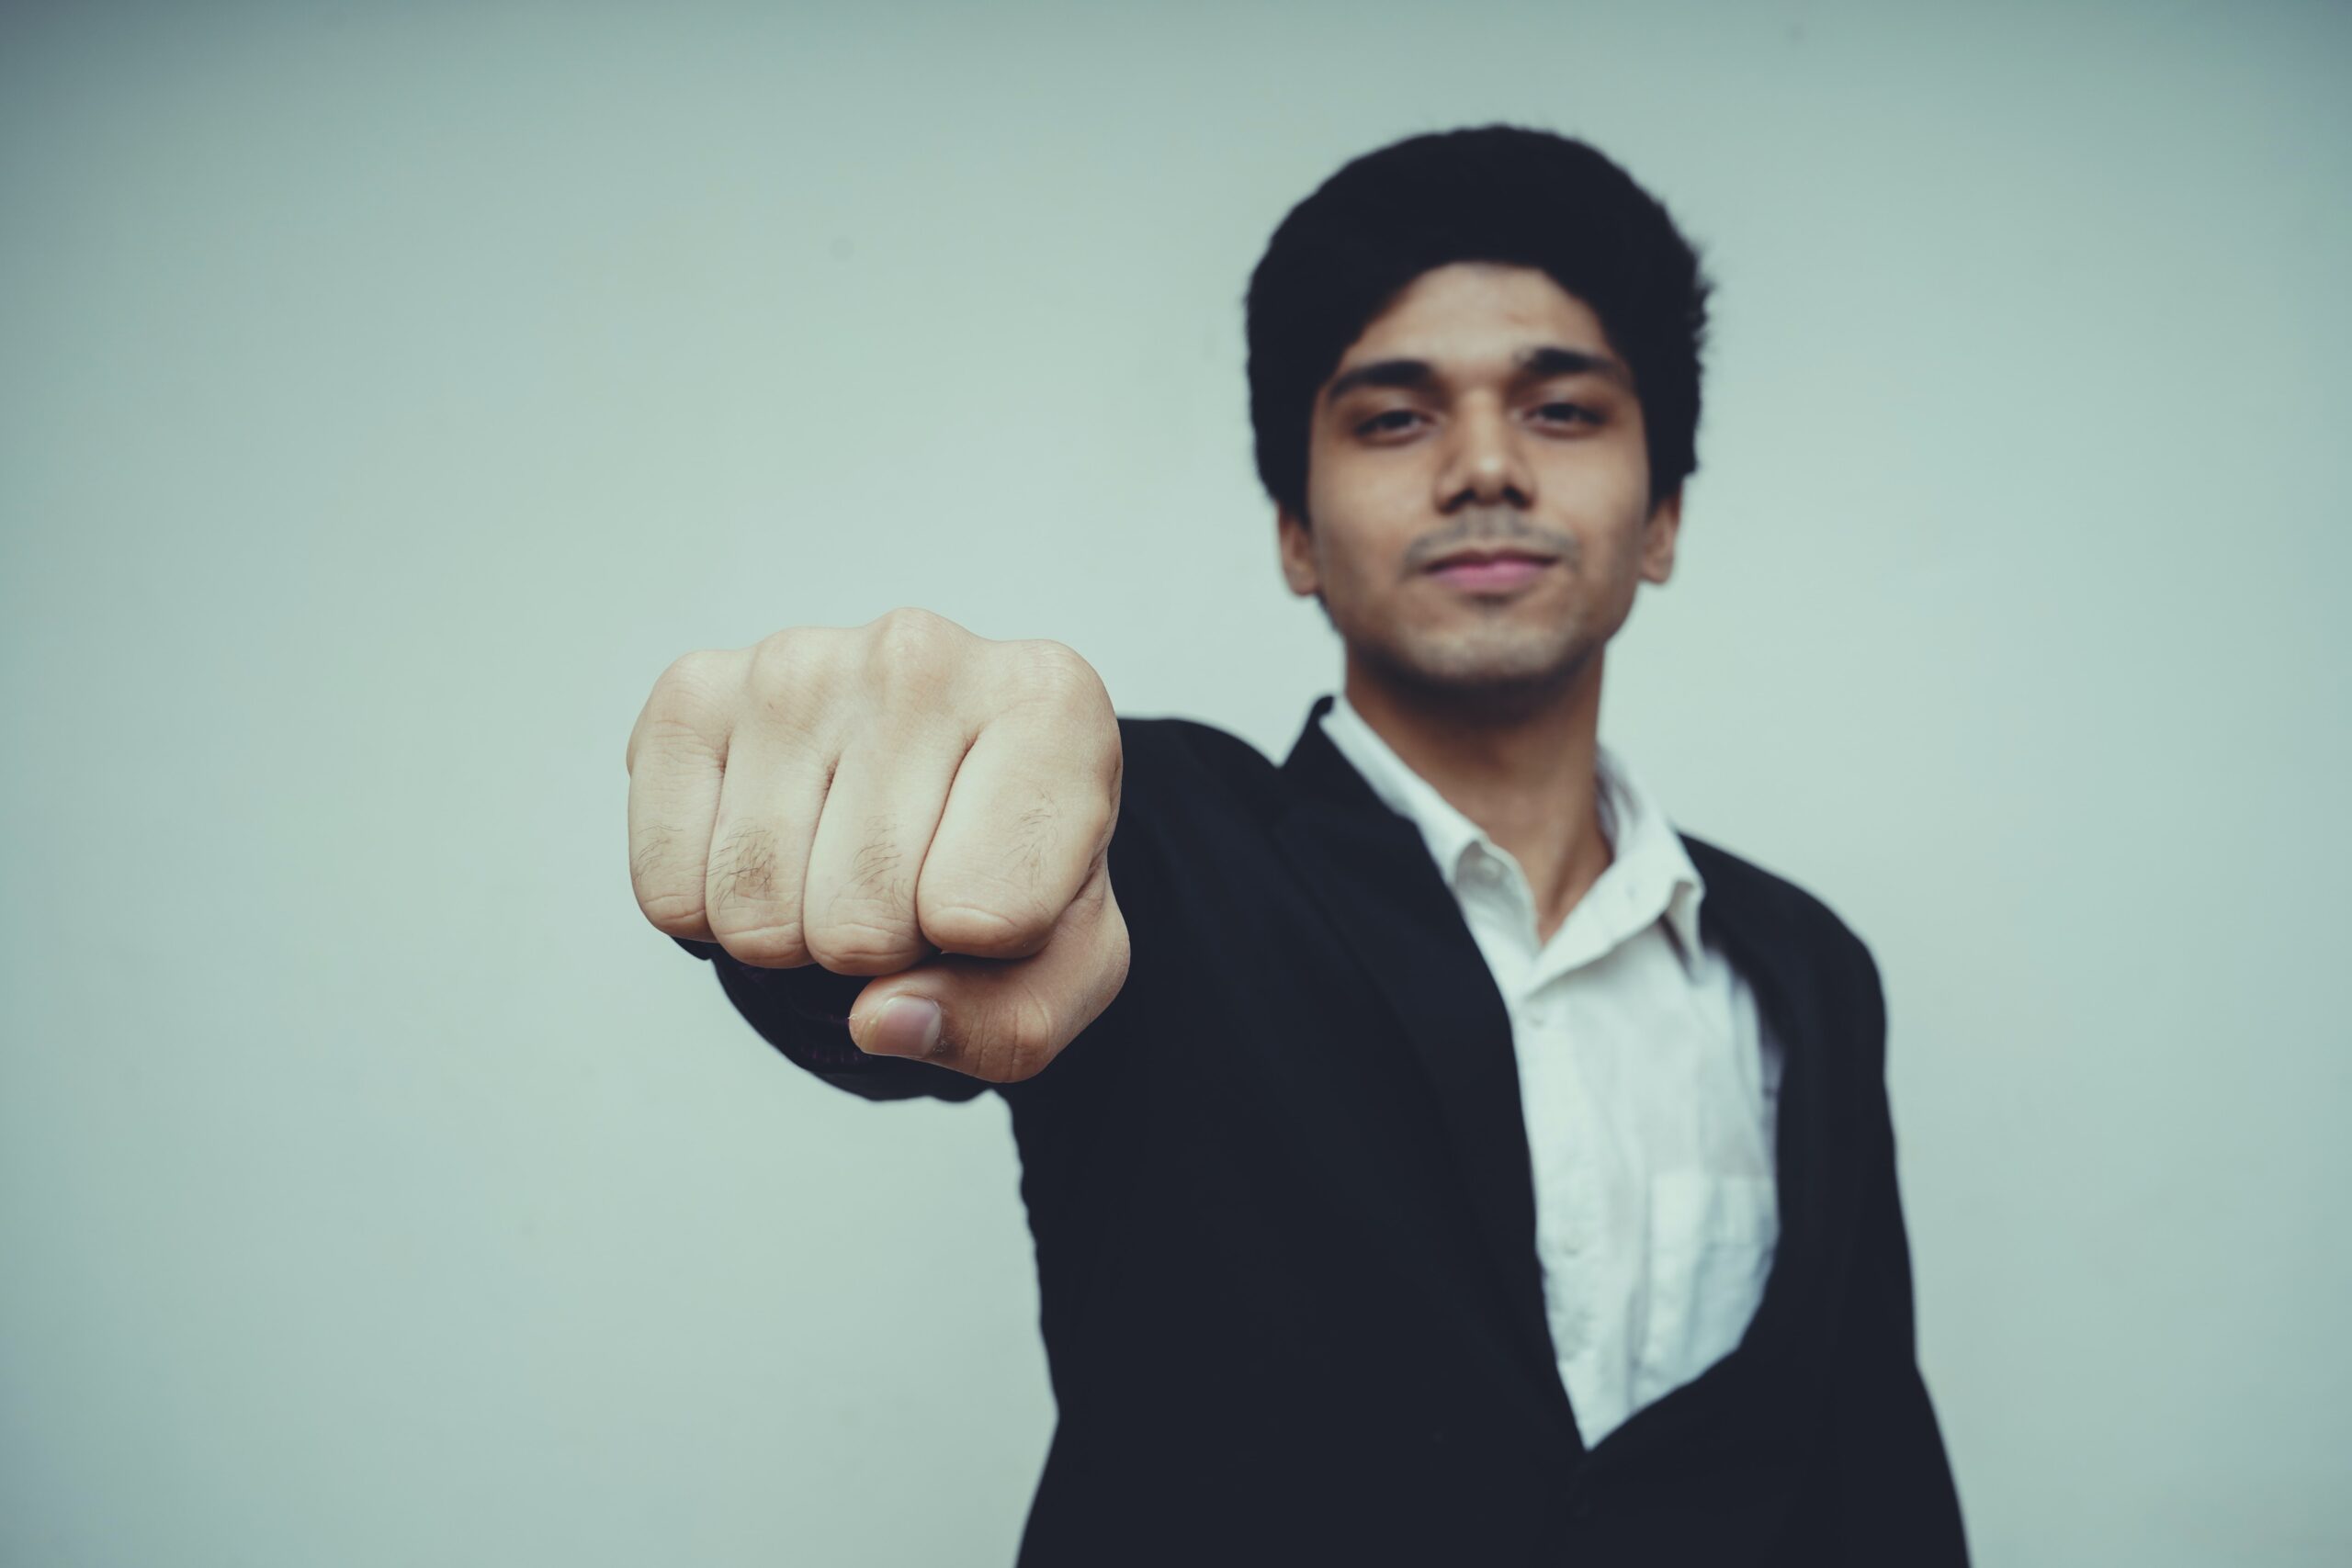 Man reaching out his hand for a fist bump